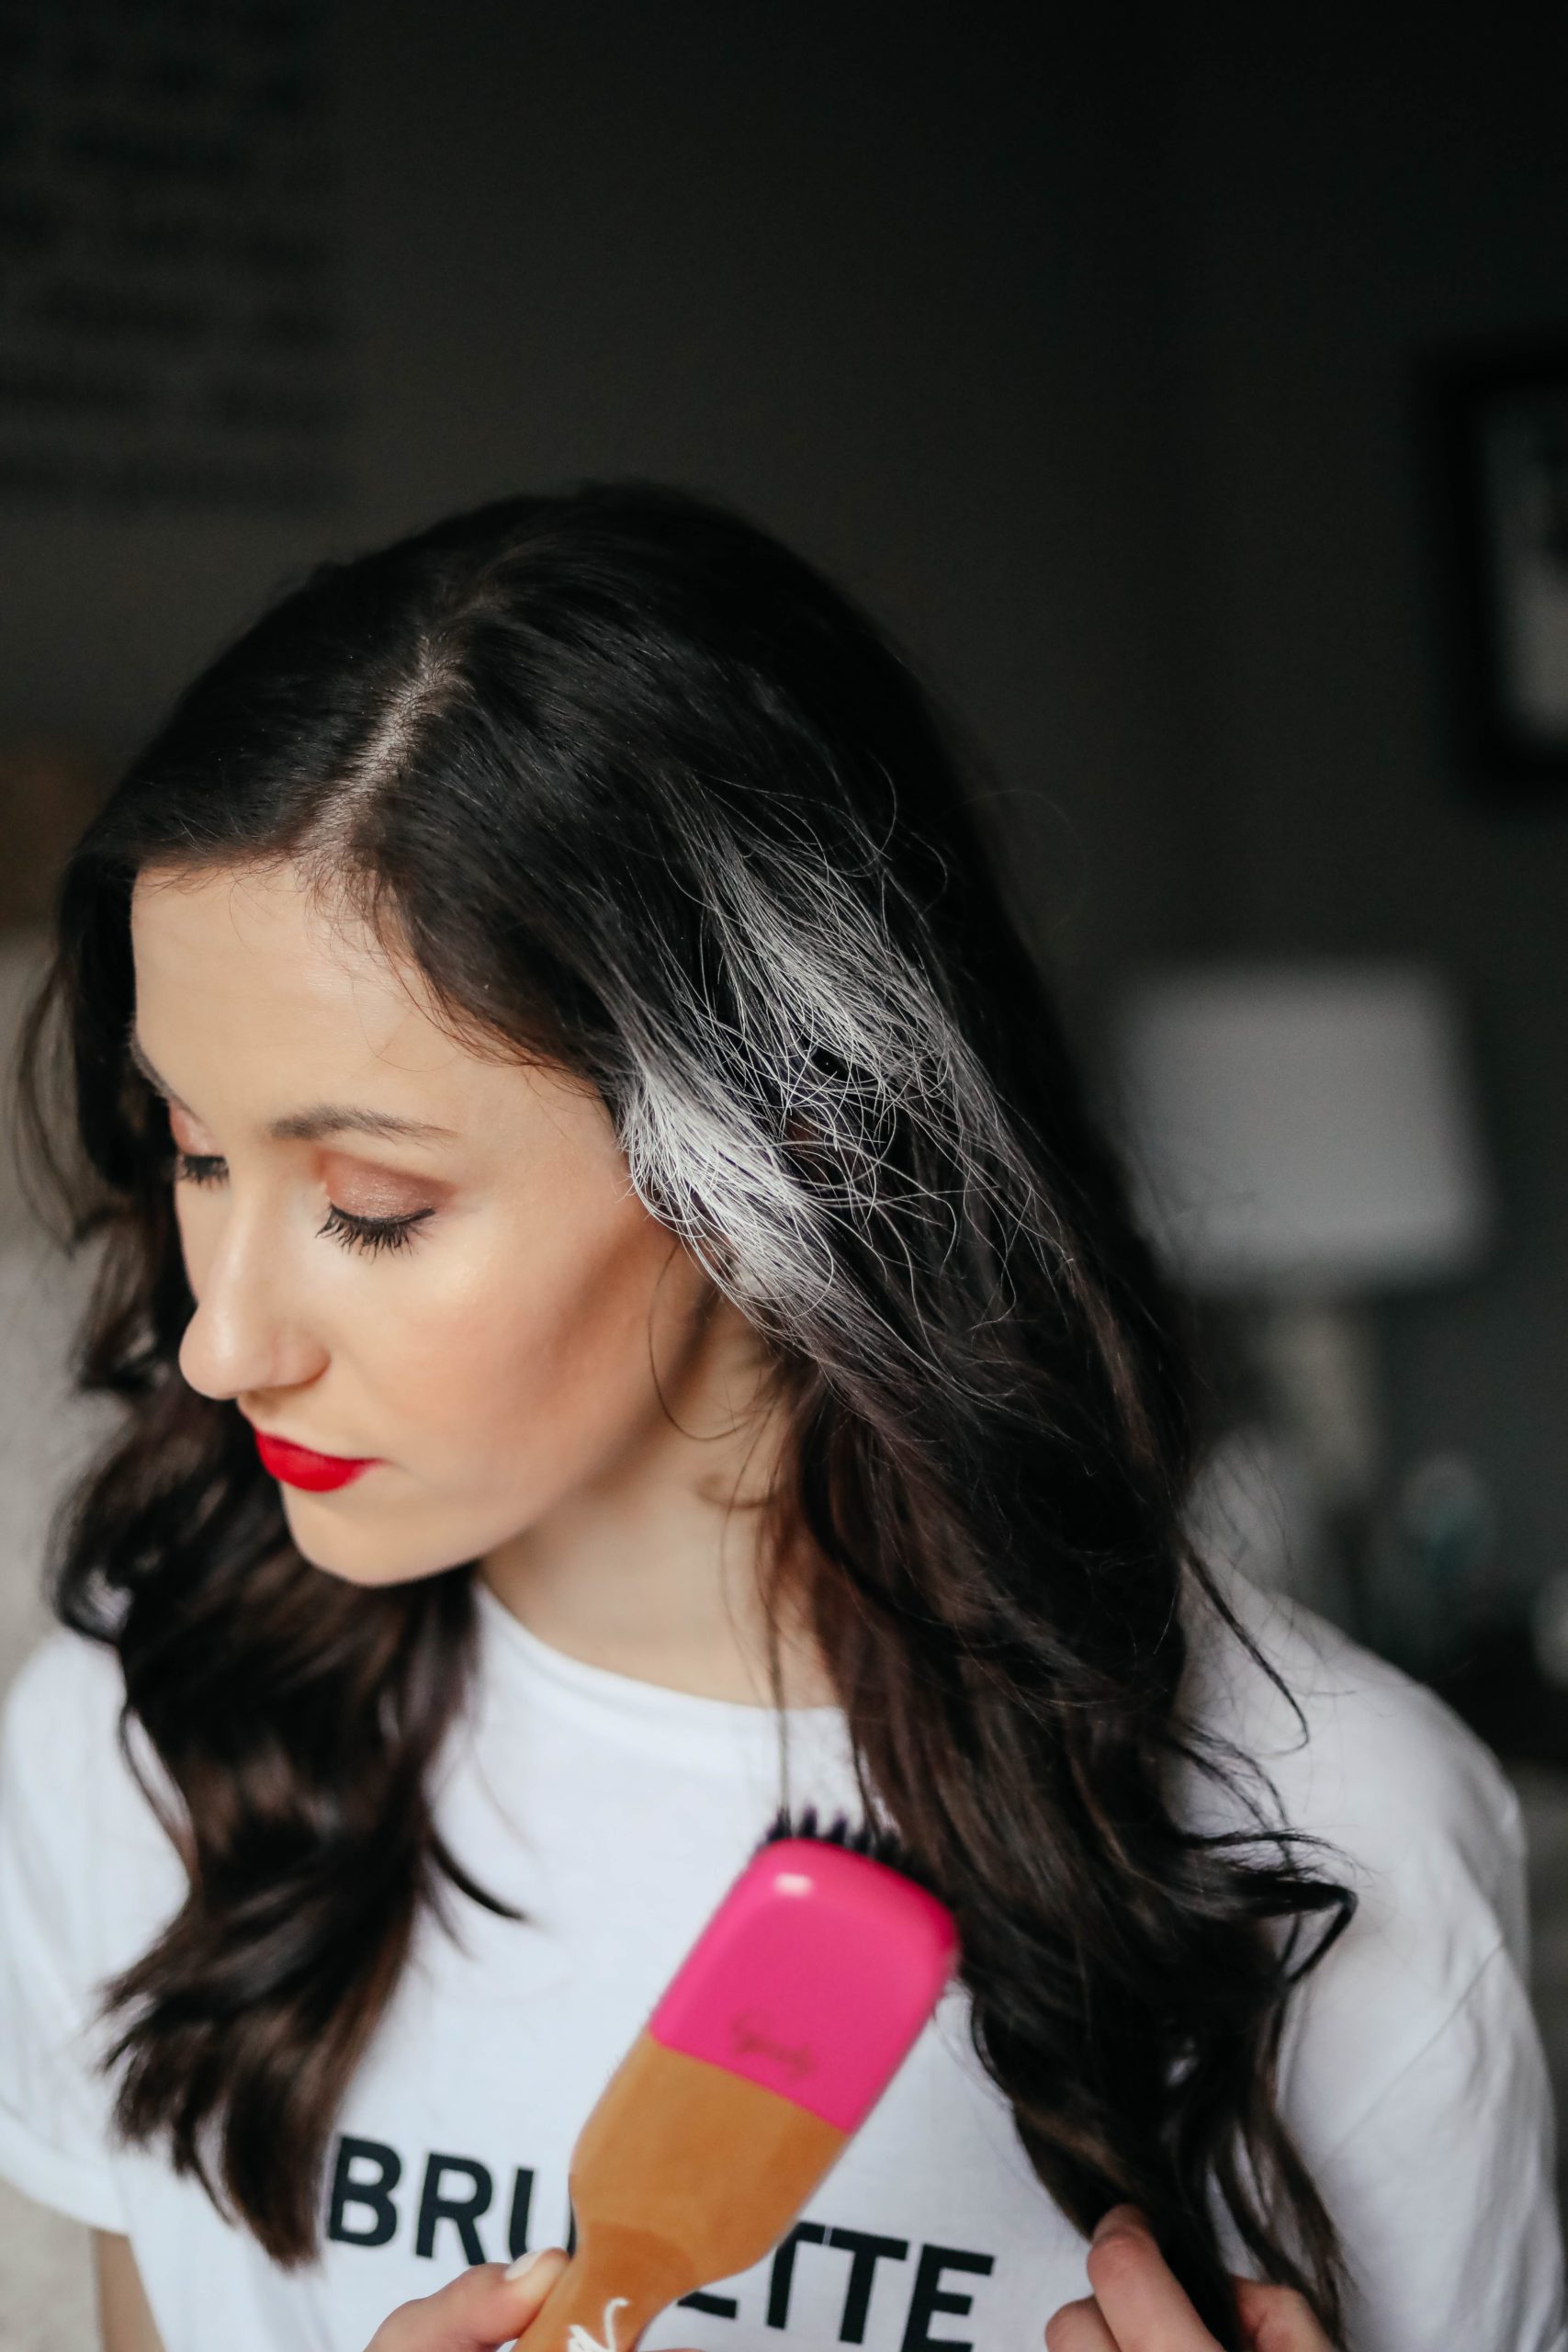 The Best Dry Shampoo for BRUNETTES - Brunette dry shampoos on Coming Up Roses